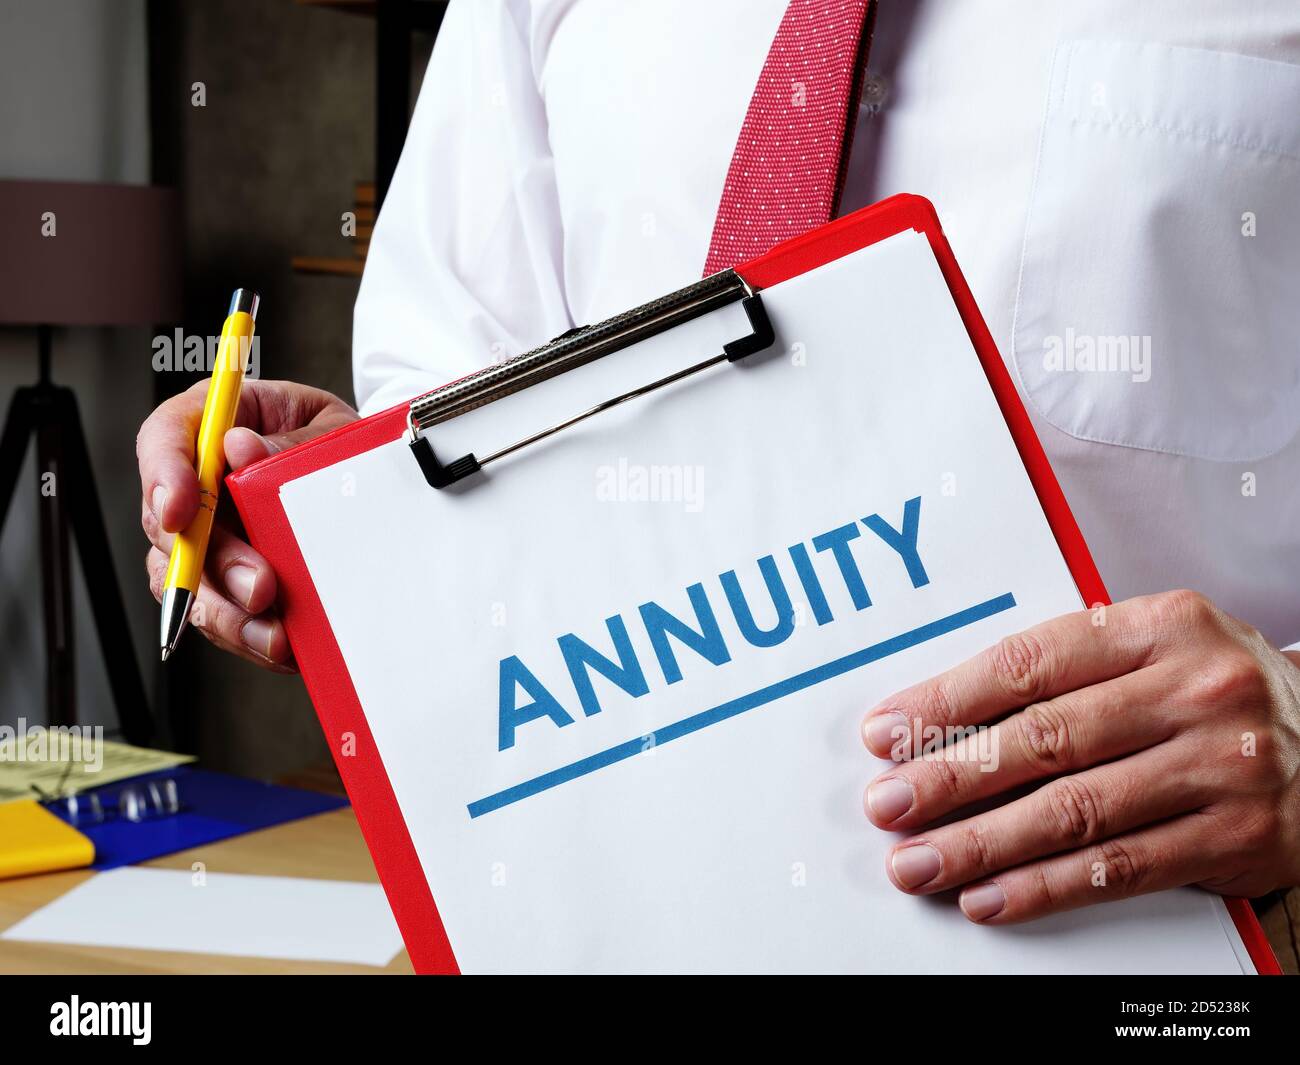 Info about Annuity and the manager offers to sign the documents. Stock Photo